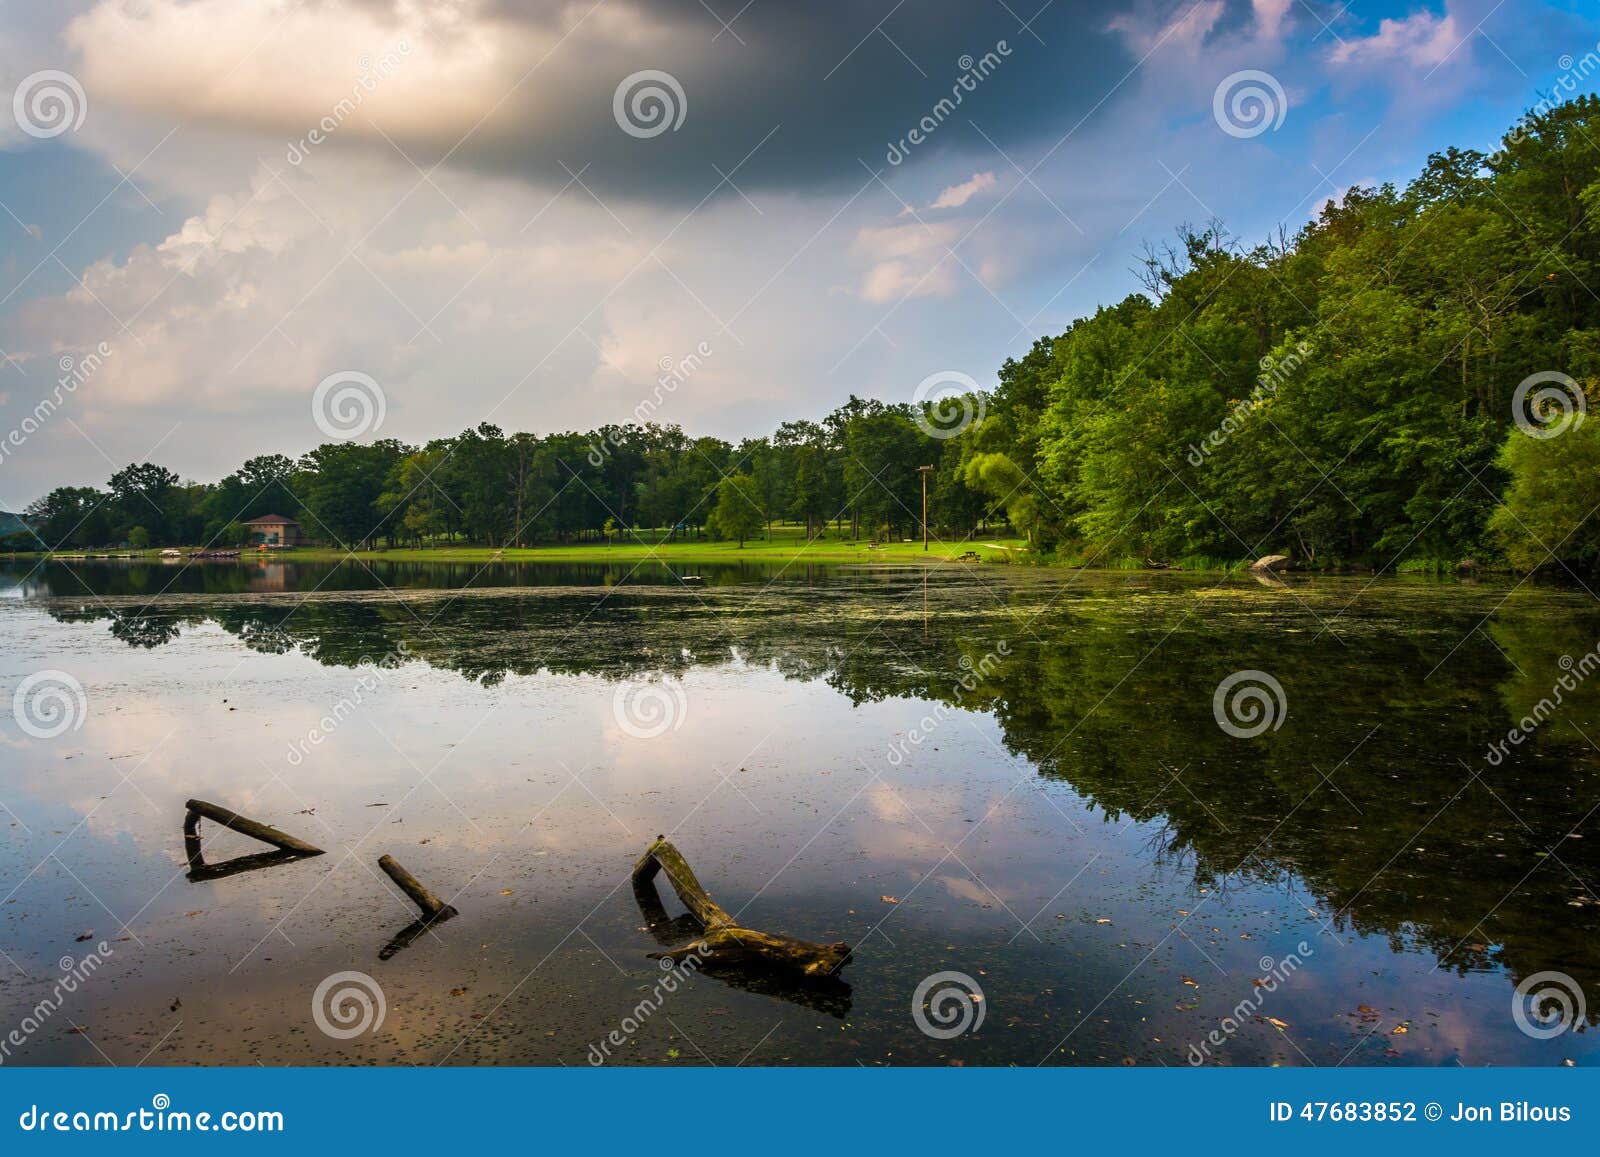 evening reflections in a swampy area of lake pinchot, gifford pi